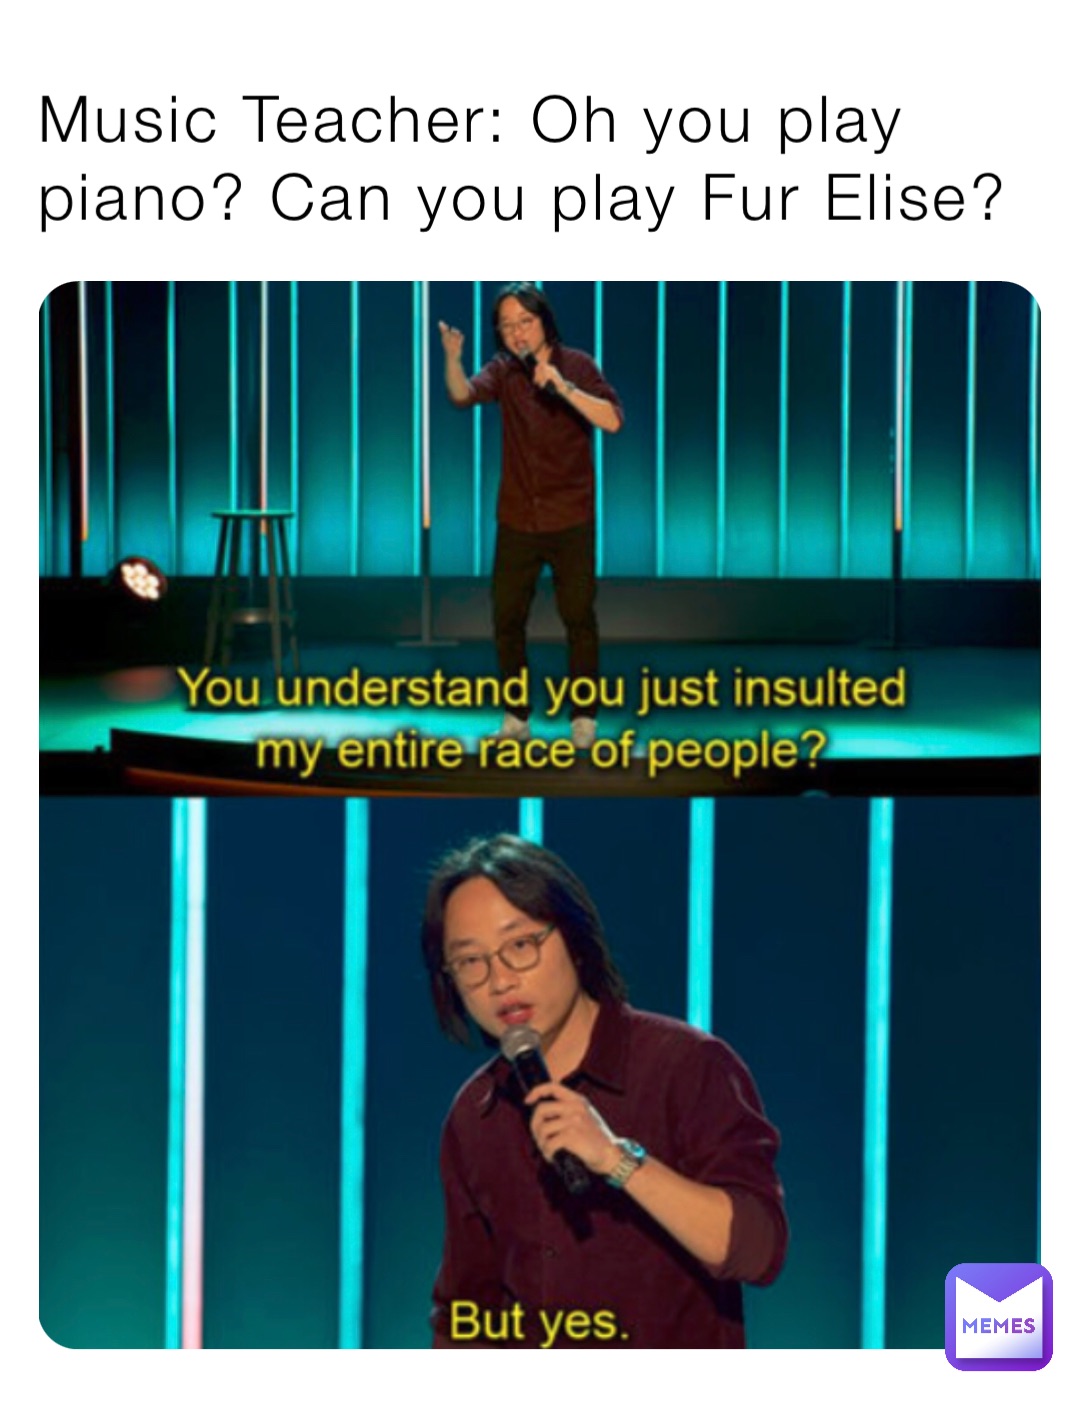 Music Teacher: Oh you play piano? Can you play Fur Elise?